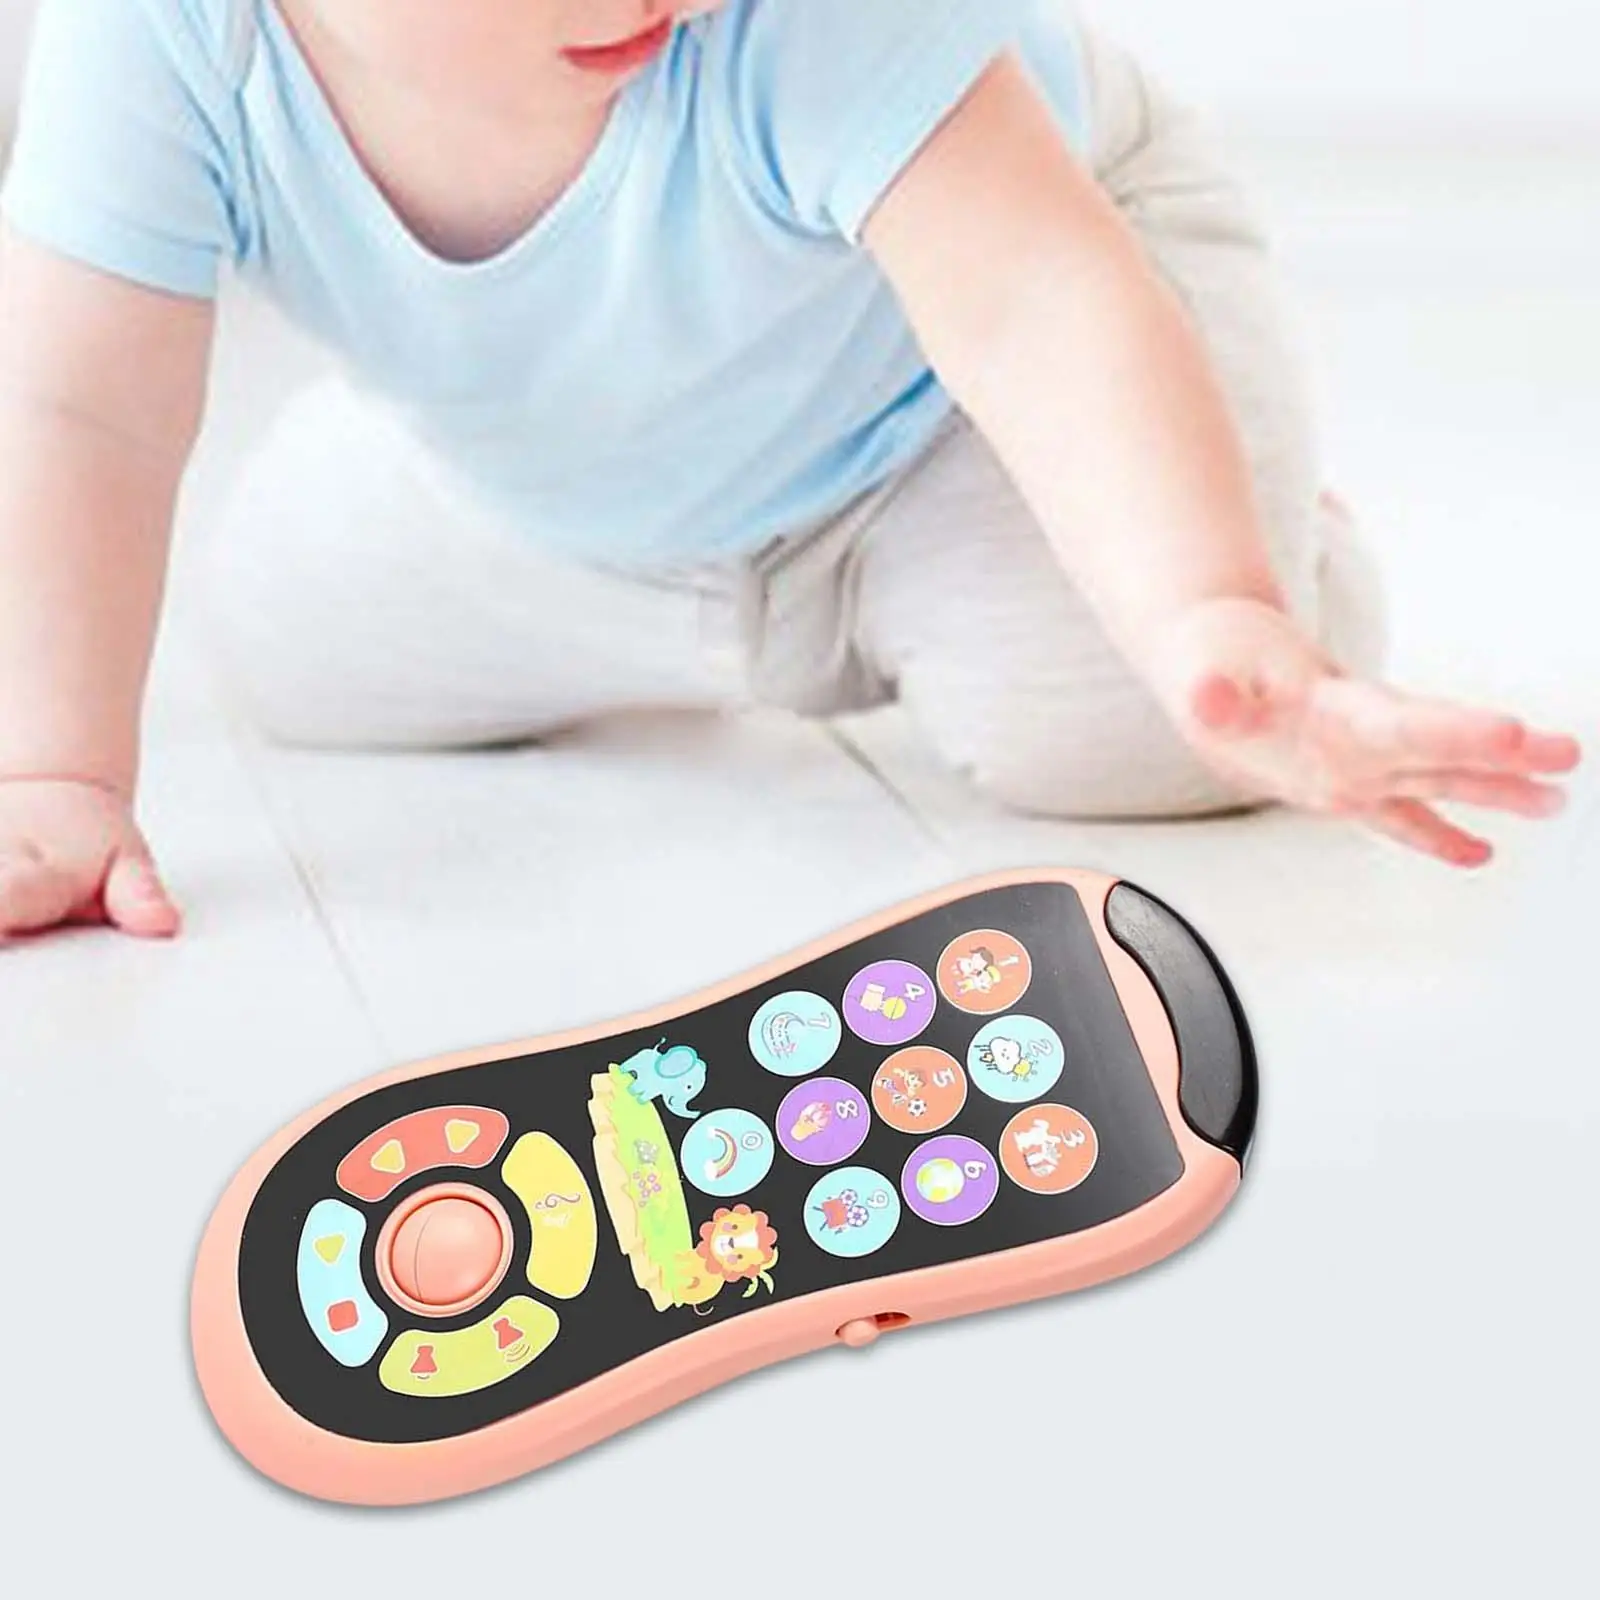 Mini Phone Toys Smartphone Toy with Lights and Music for Boy Children Kids